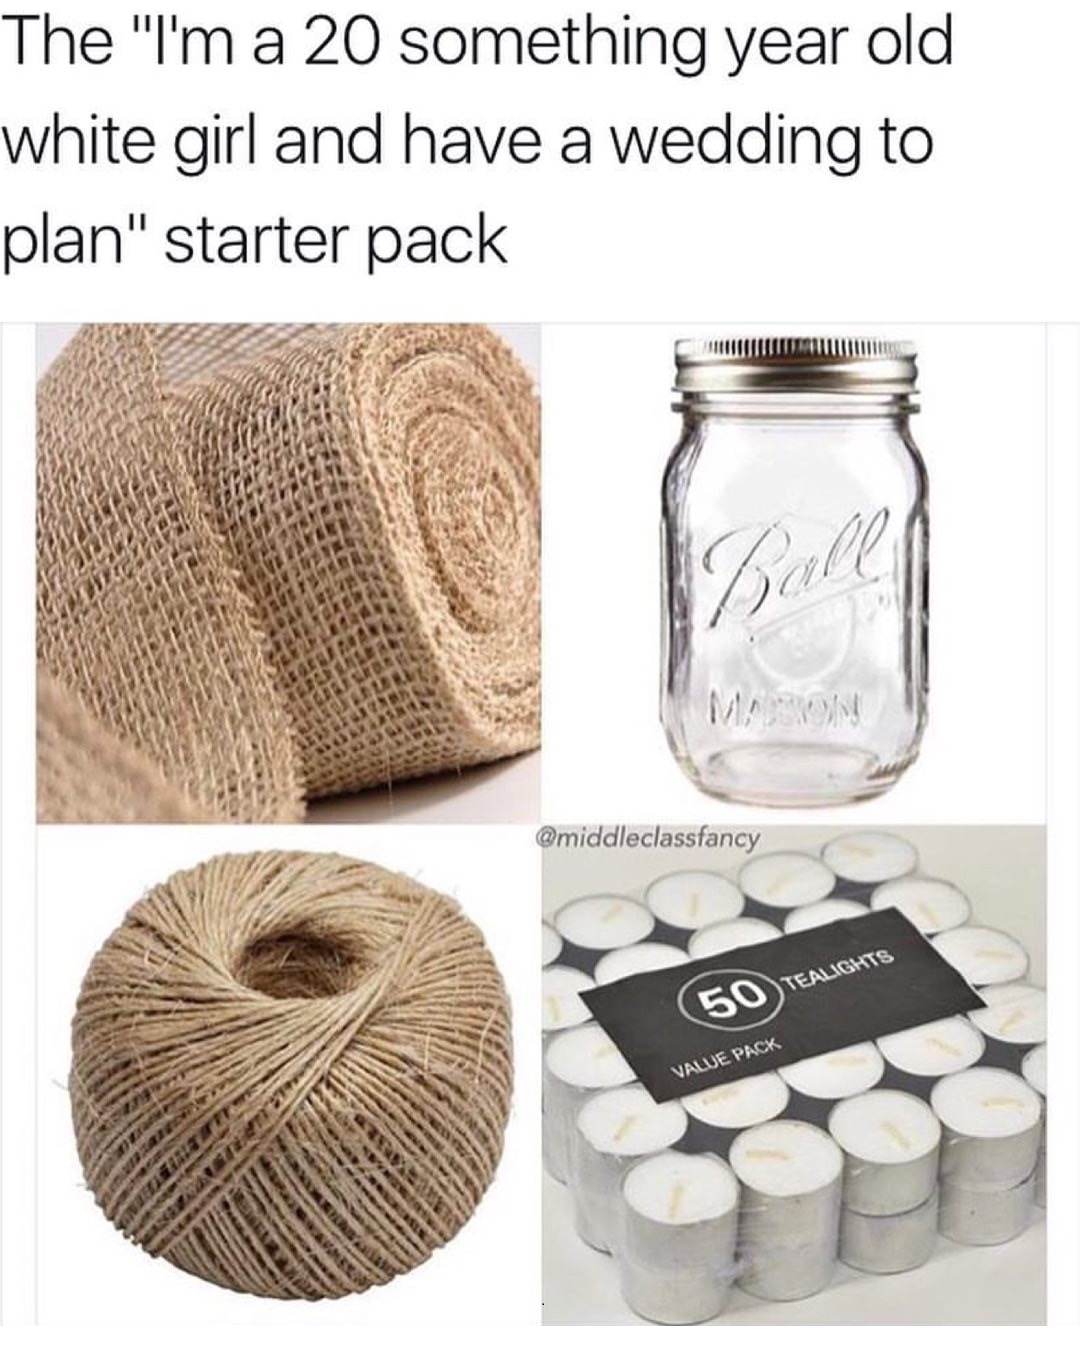 white girl wedding meme - The "I'm a 20 something year old white girl and have a wedding to plan" starter pack 50 Tealights Value Pack